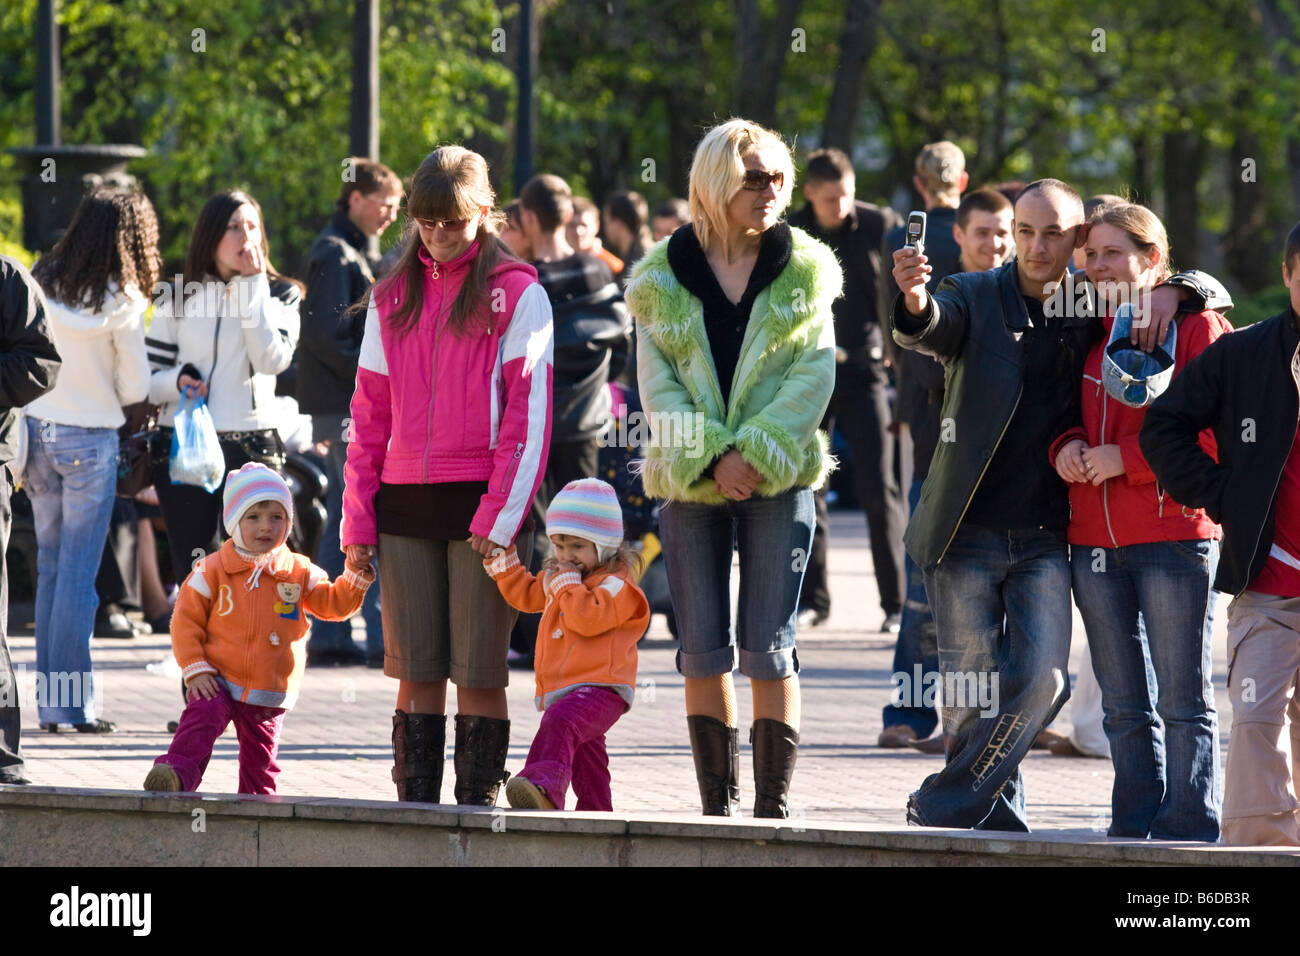 A  group of people in a park, Chisinau, Moldova. Stock Photo